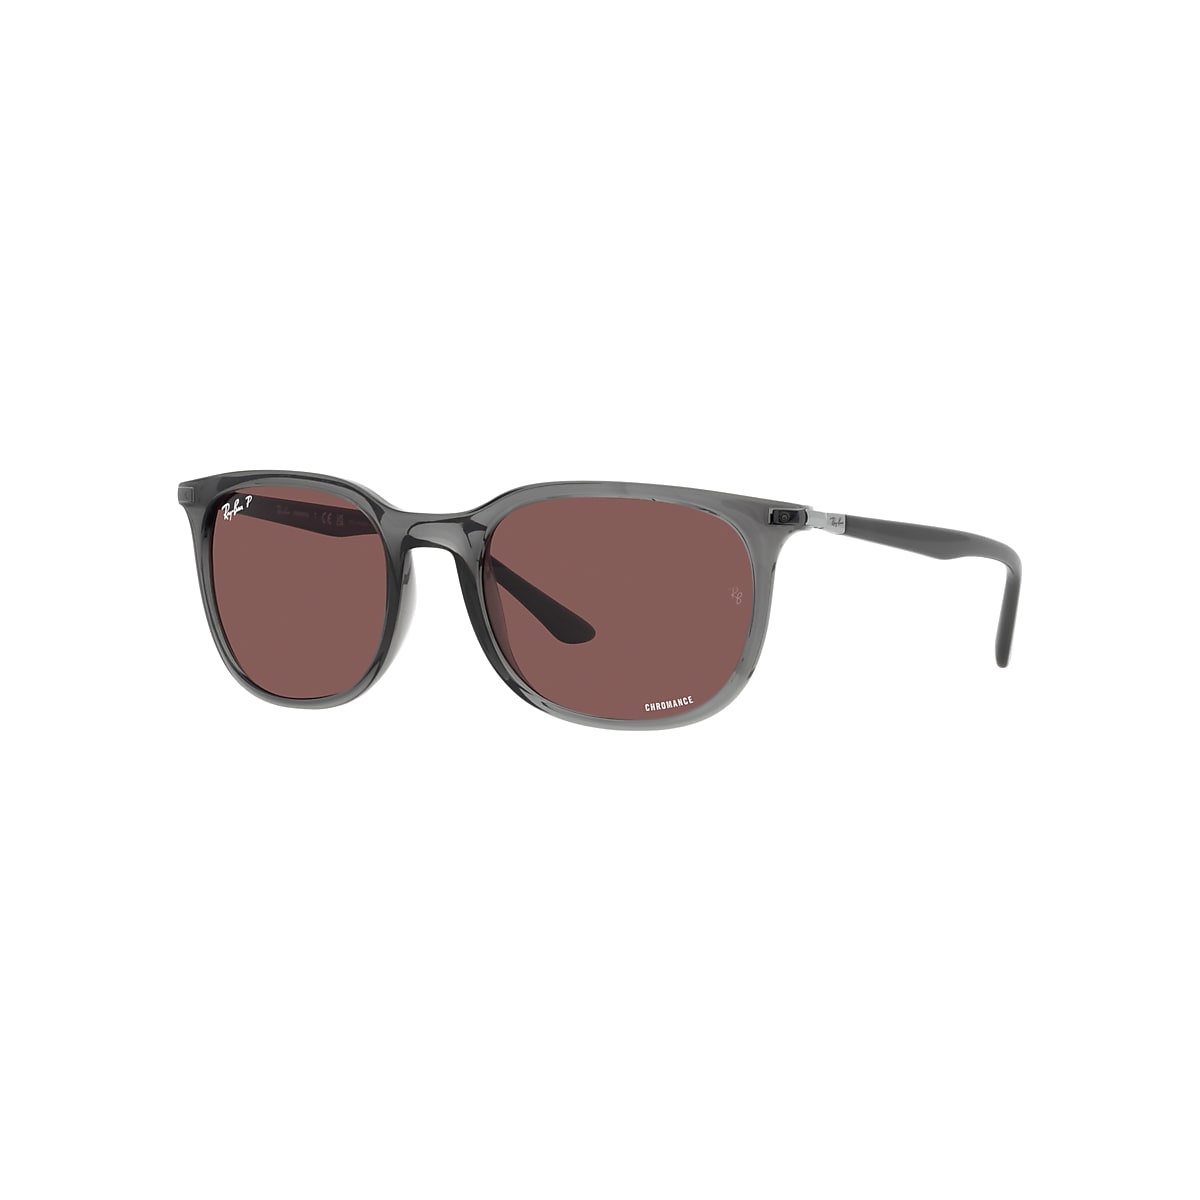 RB4386 Sunglasses in Transparent Grey and Dark Violet - Ray-Ban